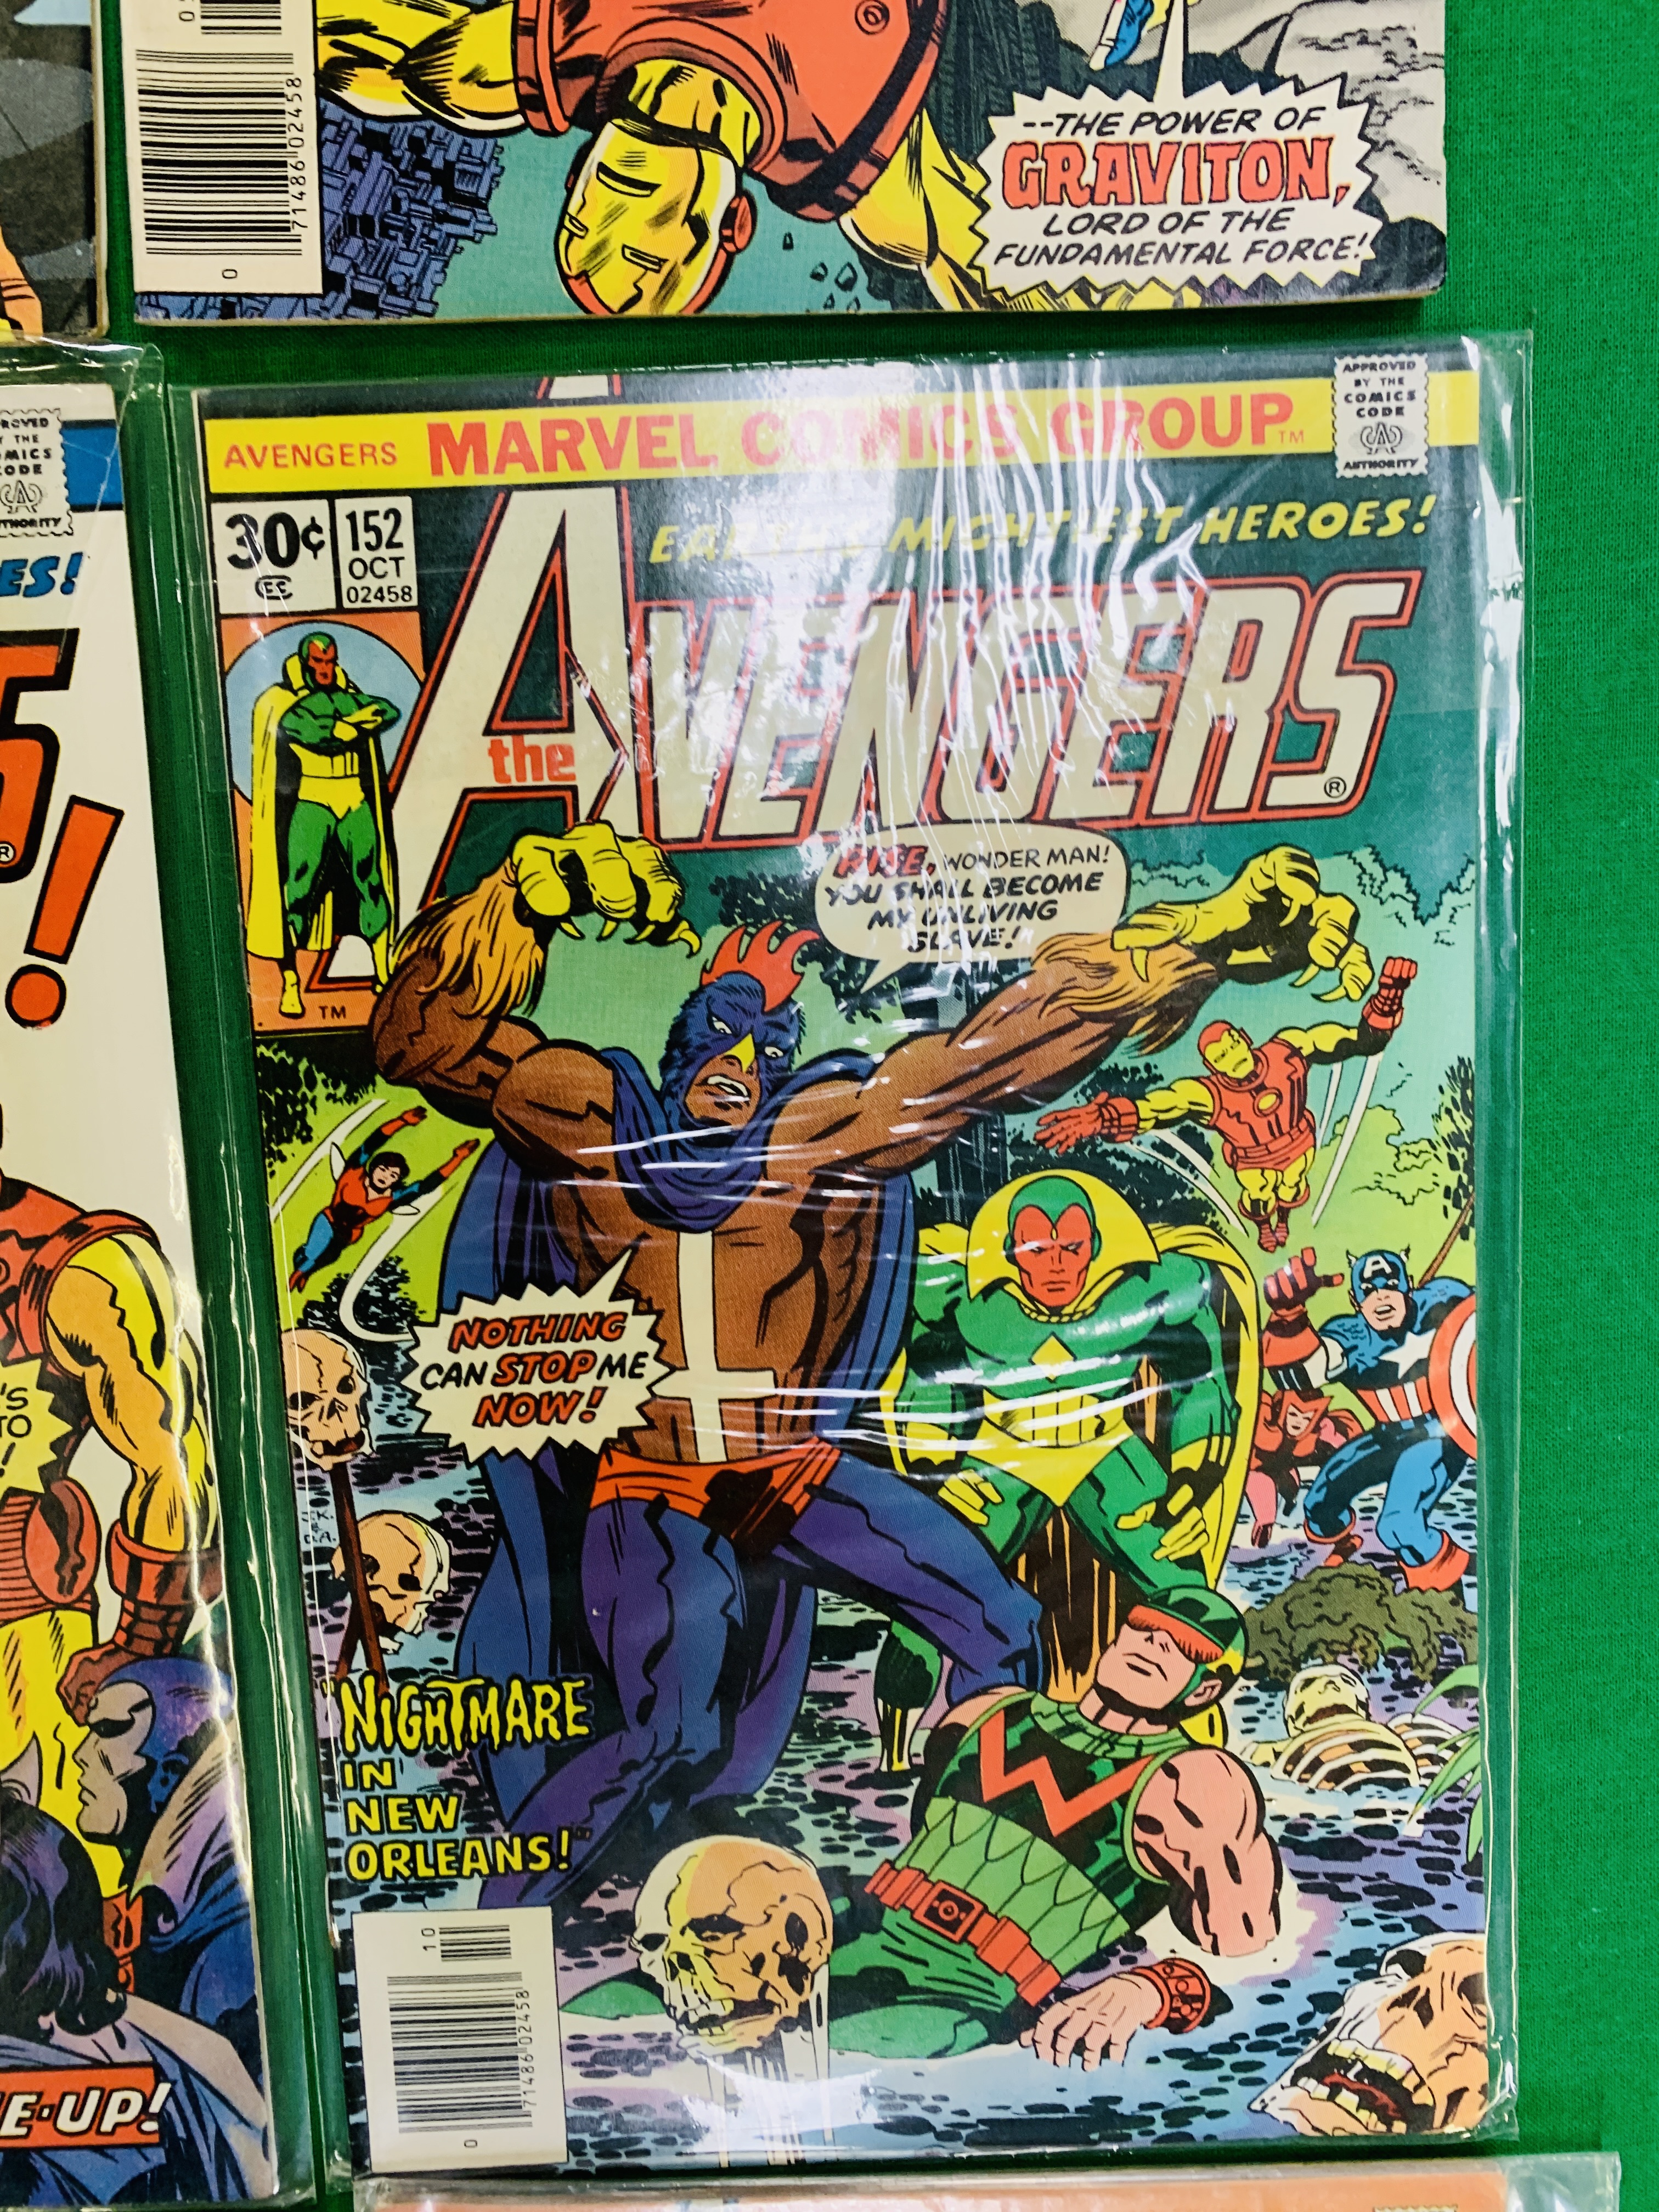 MARVEL COMICS THE AVENGERS NO. 101 - 299, MISSING ISSUES 103 AND 110. - Image 38 of 130